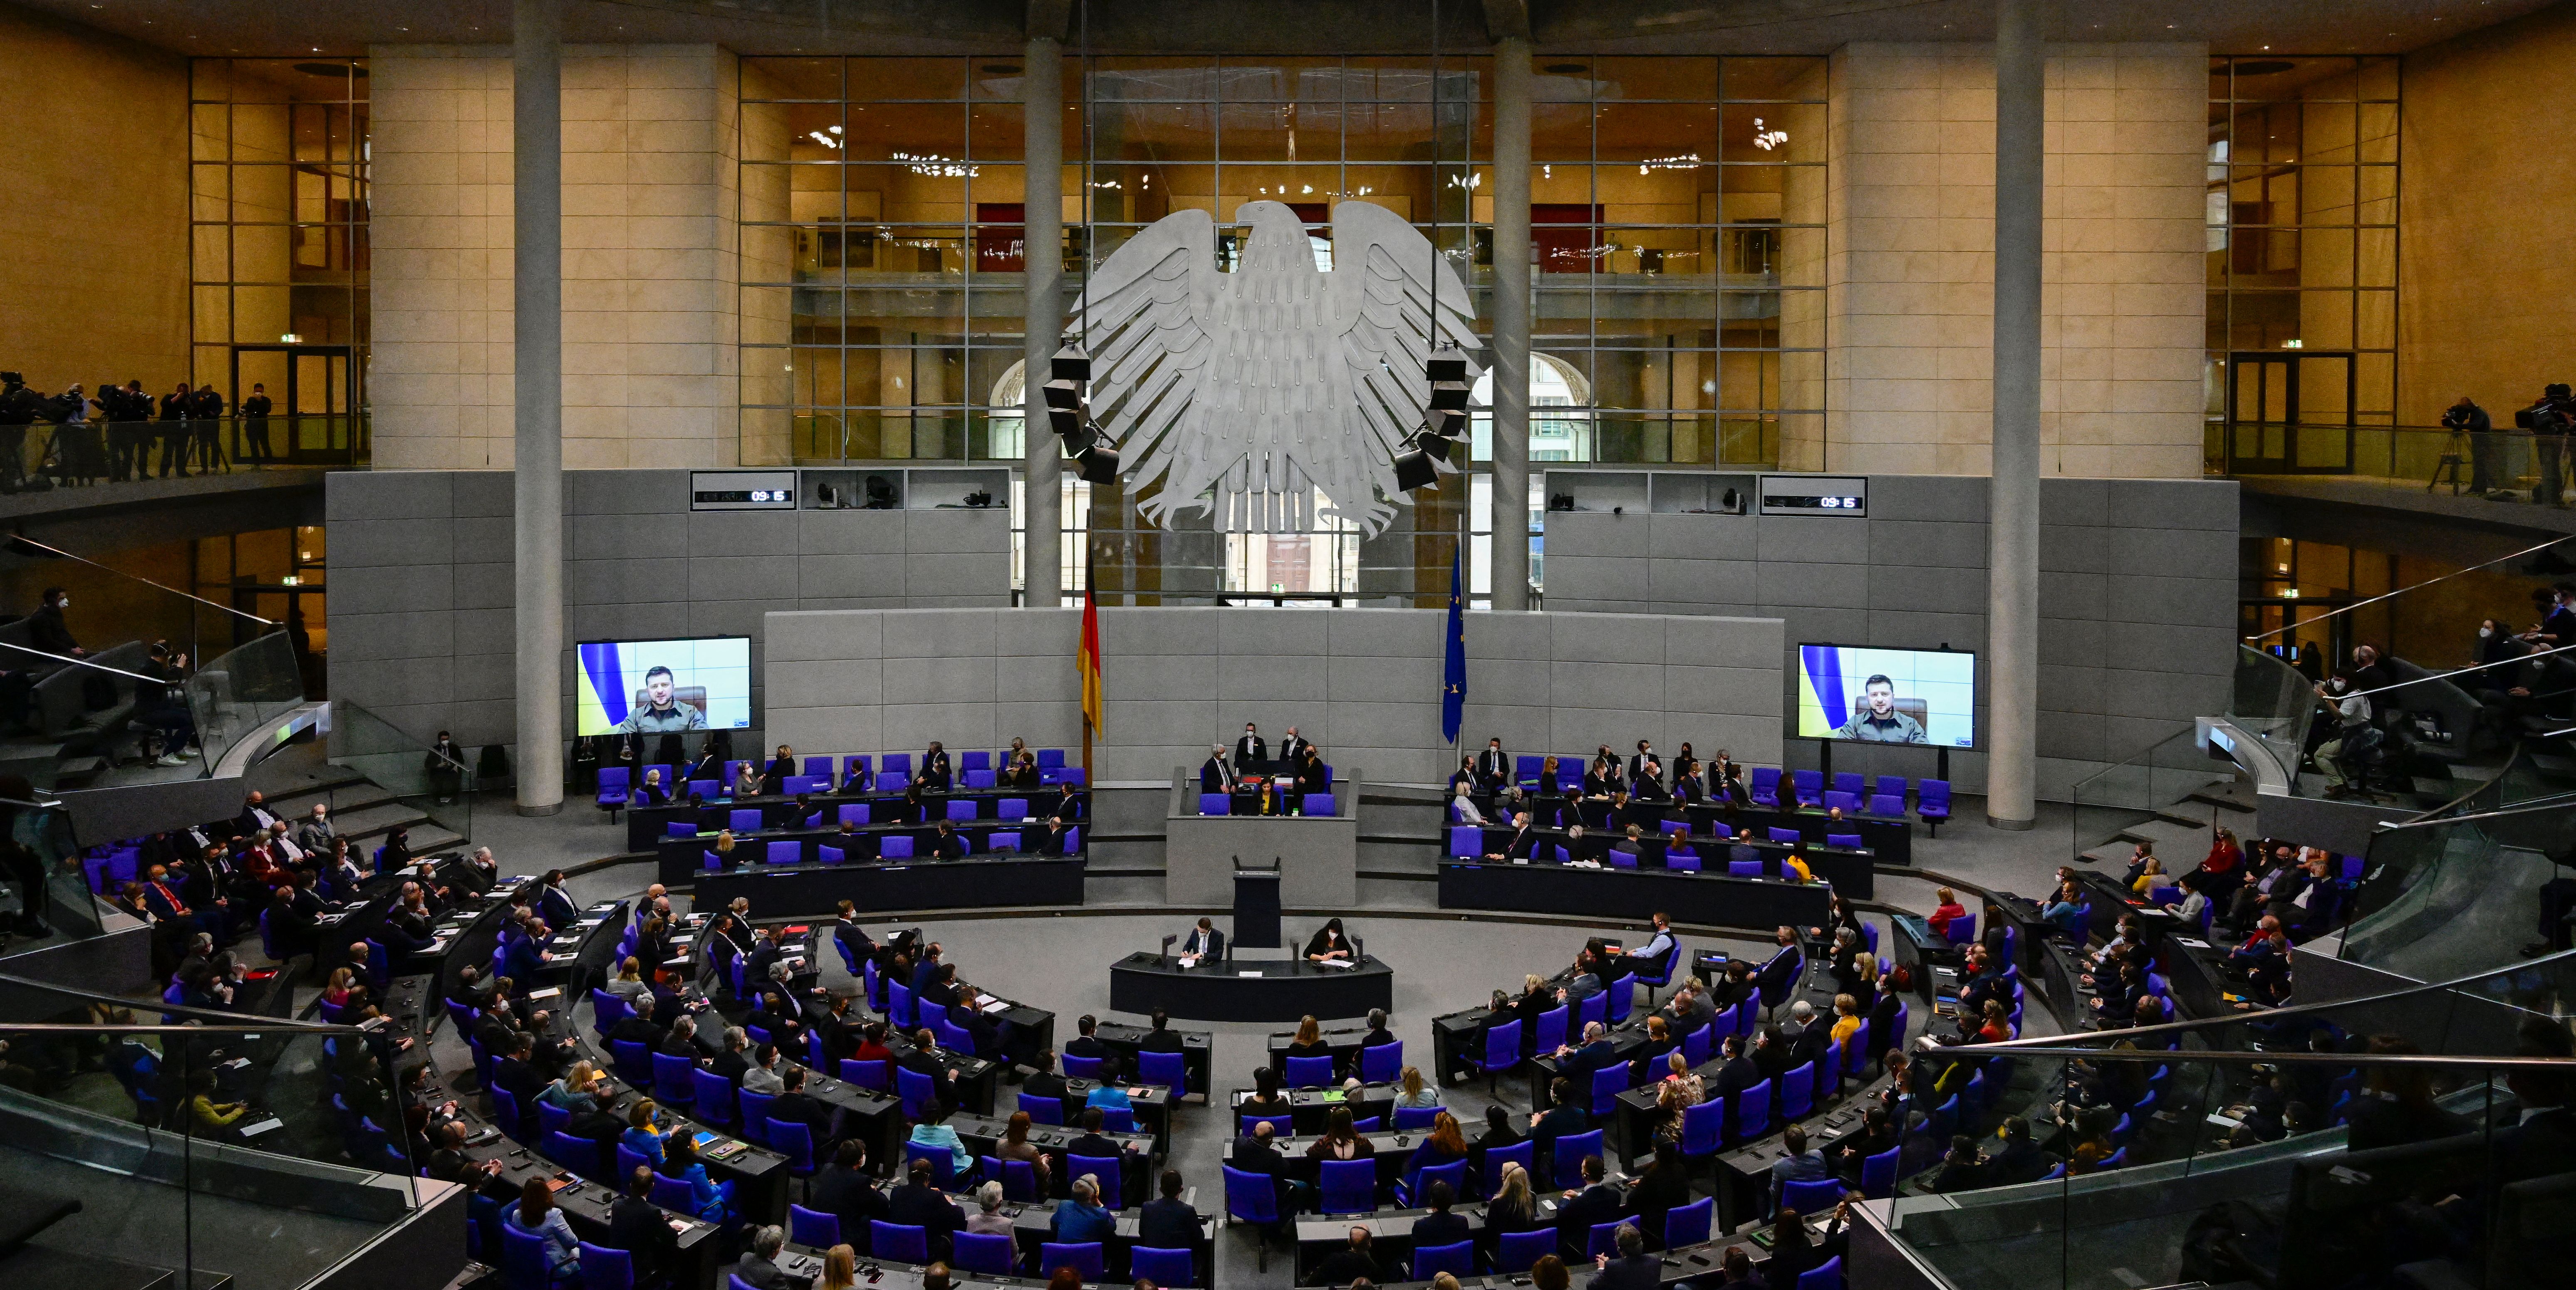 Members of parliament and of the German government listen as Ukrainian President Volodymyr Zelensky appears on two screens to address via videolink the German Bundestag on March 17, in Berlin, Germany.